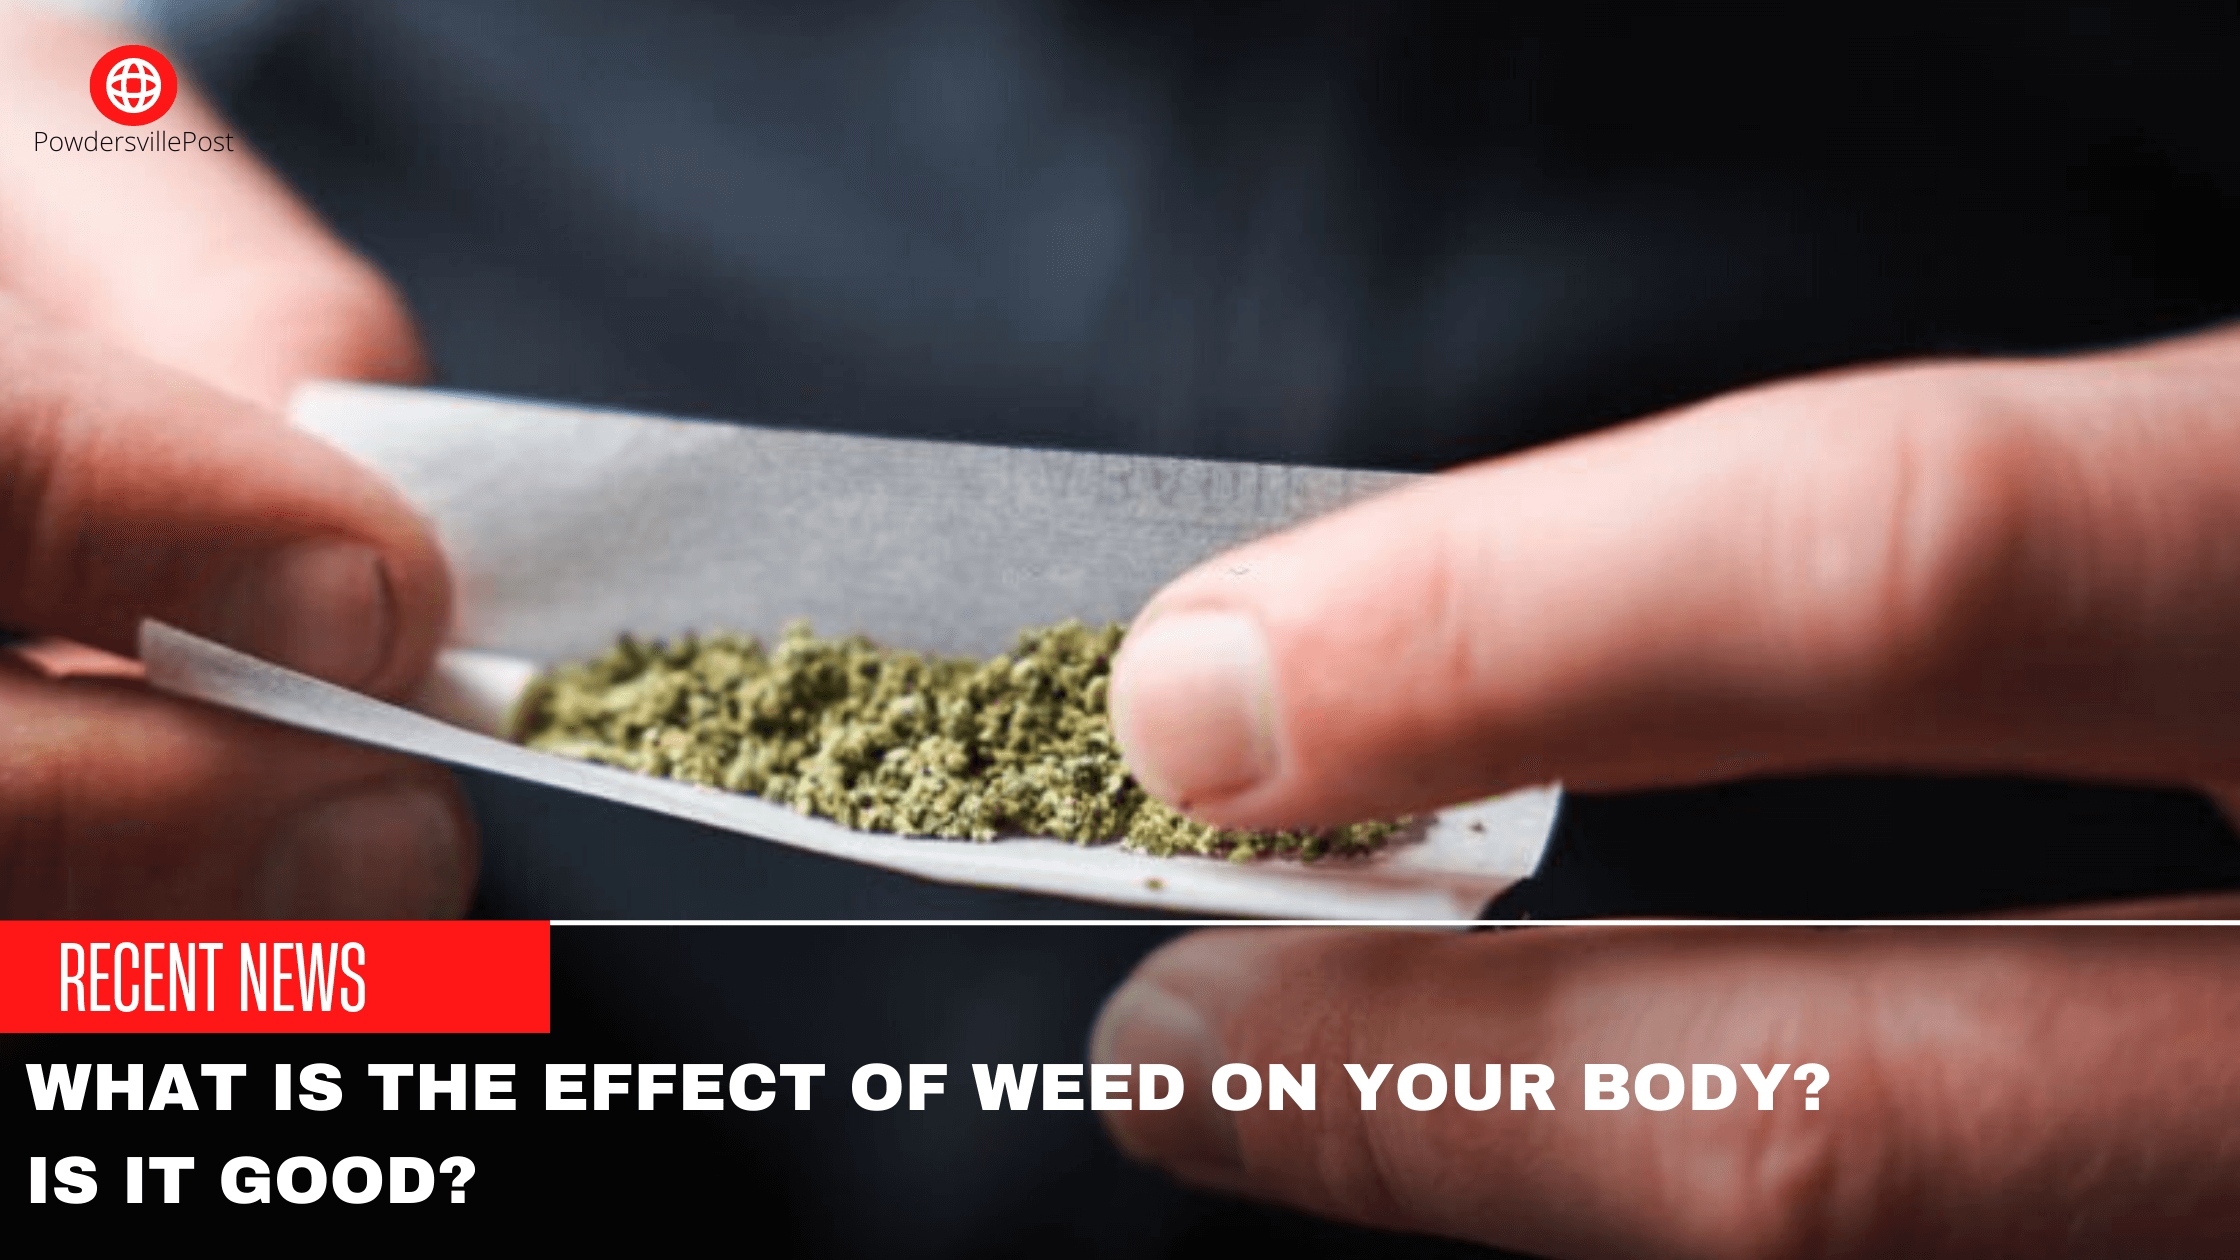 What Is The Effect Of Weed On Your Body? Is It Good?